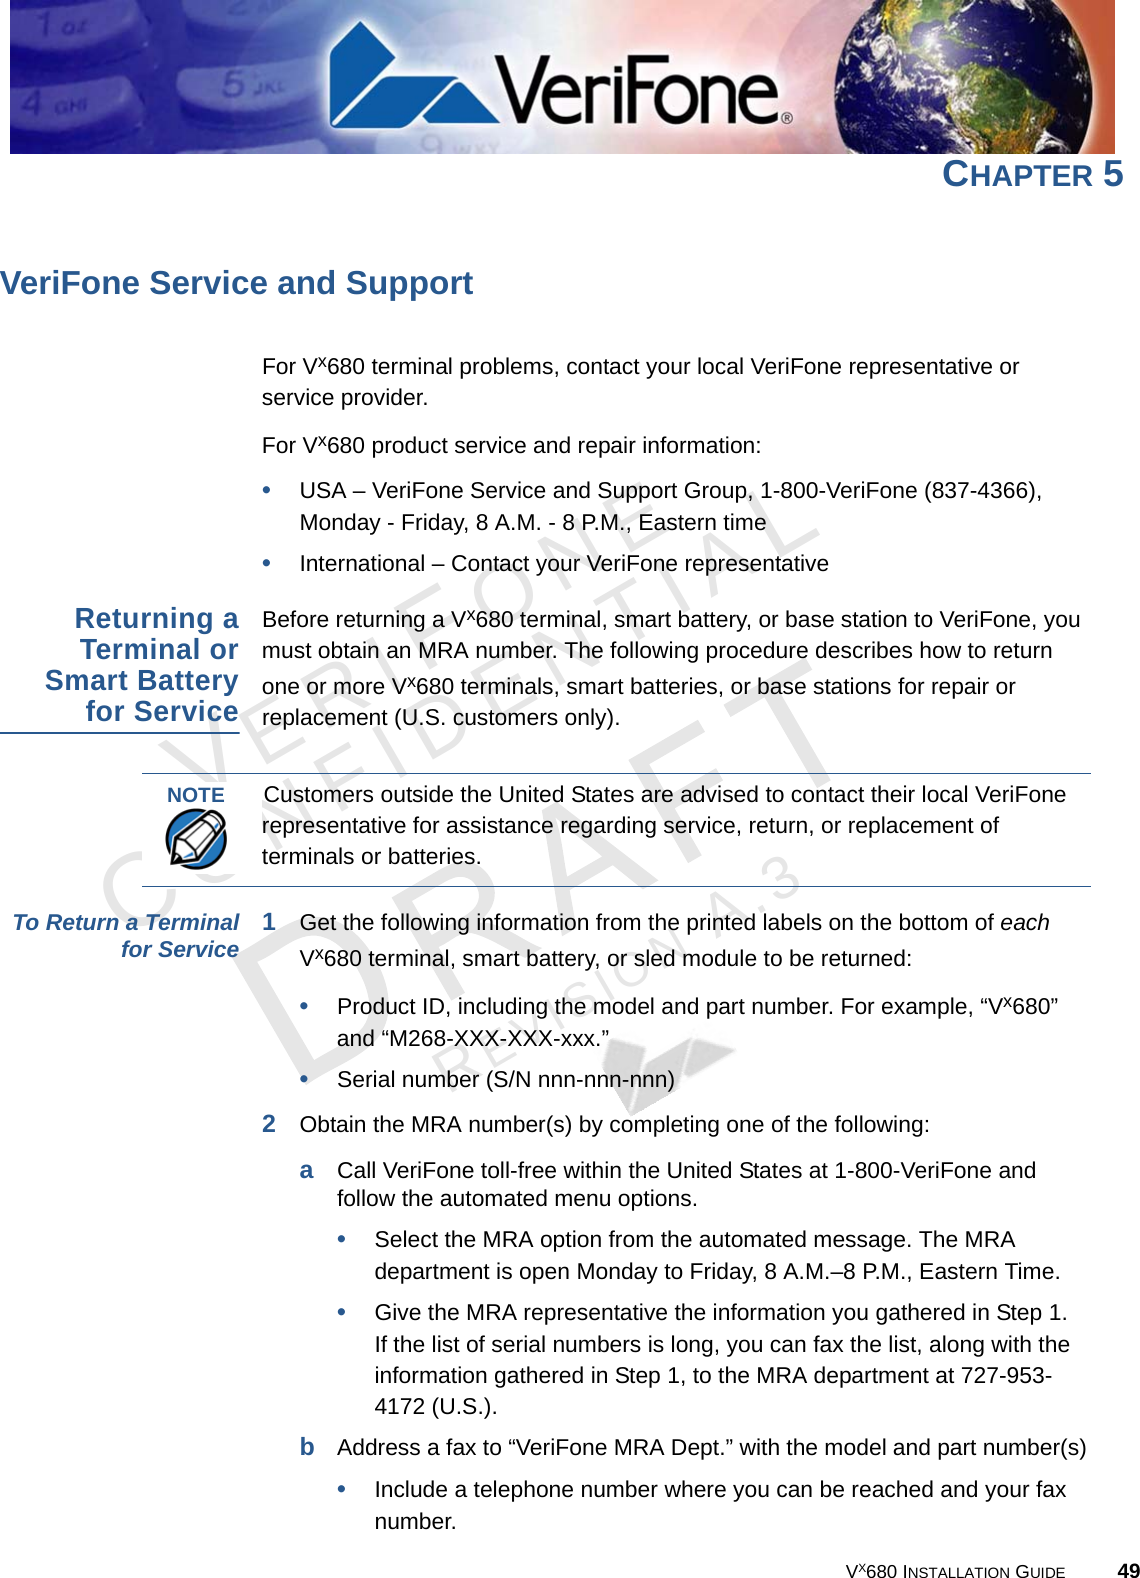 VX680 INSTALLATION GUIDE 49VERIFONECONFIDENTIALREVISION A.3 CHAPTER 5VeriFone Service and SupportFor Vx680 terminal problems, contact your local VeriFone representative or service provider. For Vx680 product service and repair information:•USA – VeriFone Service and Support Group, 1-800-VeriFone (837-4366), Monday - Friday, 8 A.M. - 8 P.M., Eastern time•International – Contact your VeriFone representative Returning aTerminal orSmart Batteryfor ServiceBefore returning a Vx680 terminal, smart battery, or base station to VeriFone, you must obtain an MRA number. The following procedure describes how to return one or more Vx680 terminals, smart batteries, or base stations for repair or replacement (U.S. customers only). To Return a Terminalfor Service 1Get the following information from the printed labels on the bottom of each Vx680 terminal, smart battery, or sled module to be returned:•Product ID, including the model and part number. For example, “Vx680” and “M268-XXX-XXX-xxx.”•Serial number (S/N nnn-nnn-nnn)2Obtain the MRA number(s) by completing one of the following:aCall VeriFone toll-free within the United States at 1-800-VeriFone and follow the automated menu options.•Select the MRA option from the automated message. The MRA department is open Monday to Friday, 8 A.M.–8 P.M., Eastern Time.•Give the MRA representative the information you gathered in Step 1.If the list of serial numbers is long, you can fax the list, along with the information gathered in Step 1, to the MRA department at 727-953-4172 (U.S.).bAddress a fax to “VeriFone MRA Dept.” with the model and part number(s)•Include a telephone number where you can be reached and your fax number.NOTE Customers outside the United States are advised to contact their local VeriFone representative for assistance regarding service, return, or replacement of terminals or batteries.